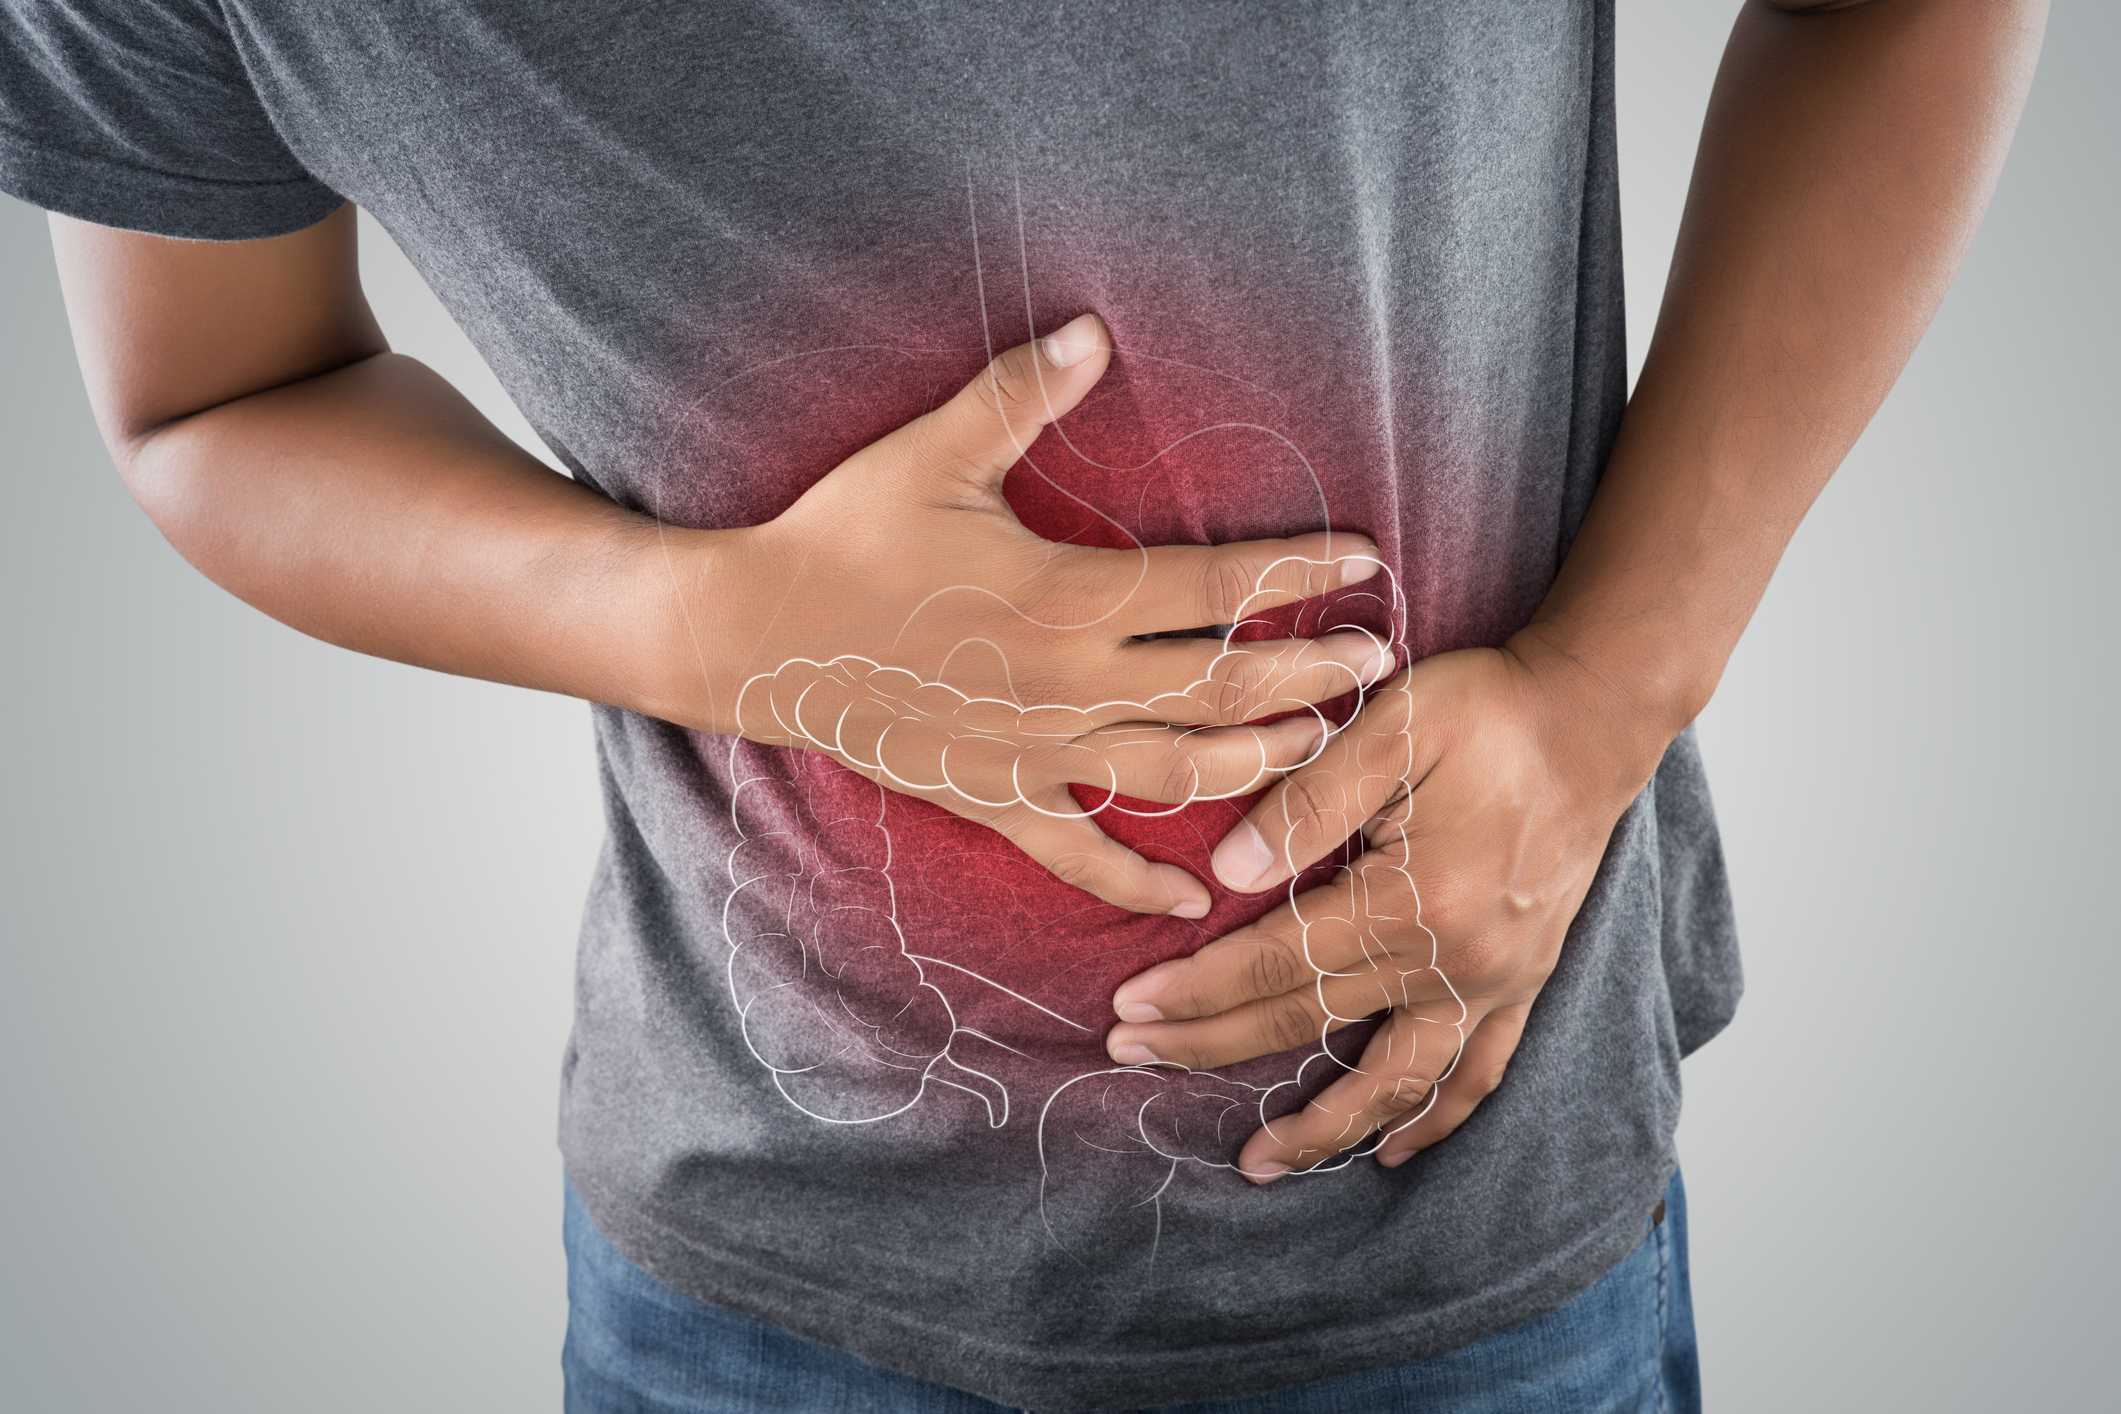 Where to Find Long Island NY Colorectal Specialists for Colon and Rectal Surgery